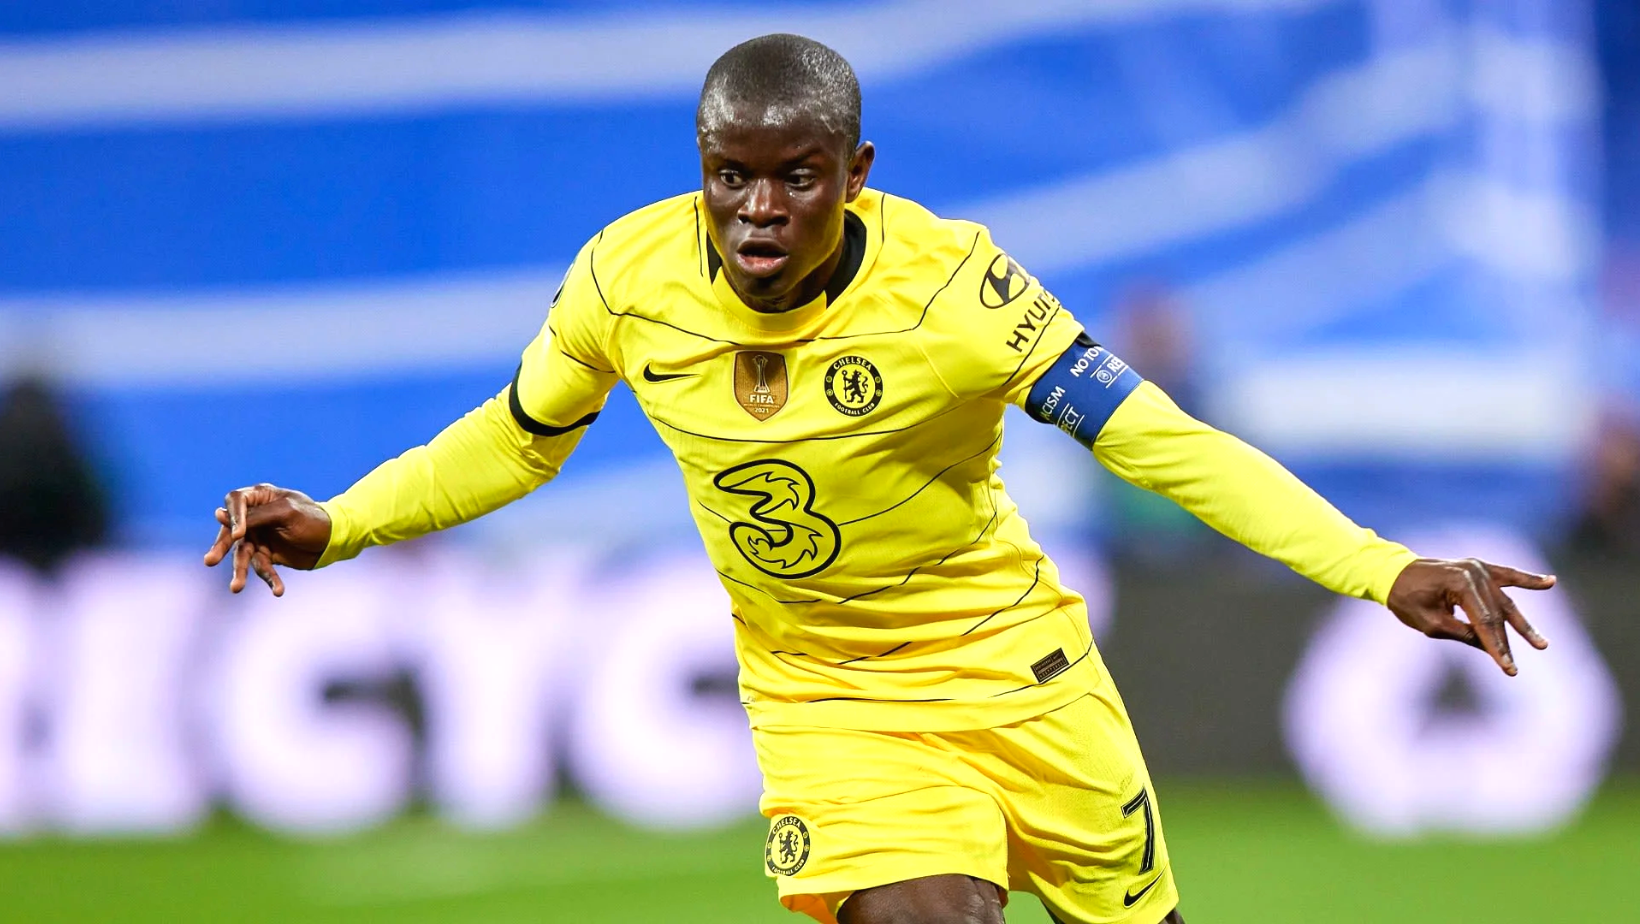 N’Golo Kante to leave Chelsea at the end of this season